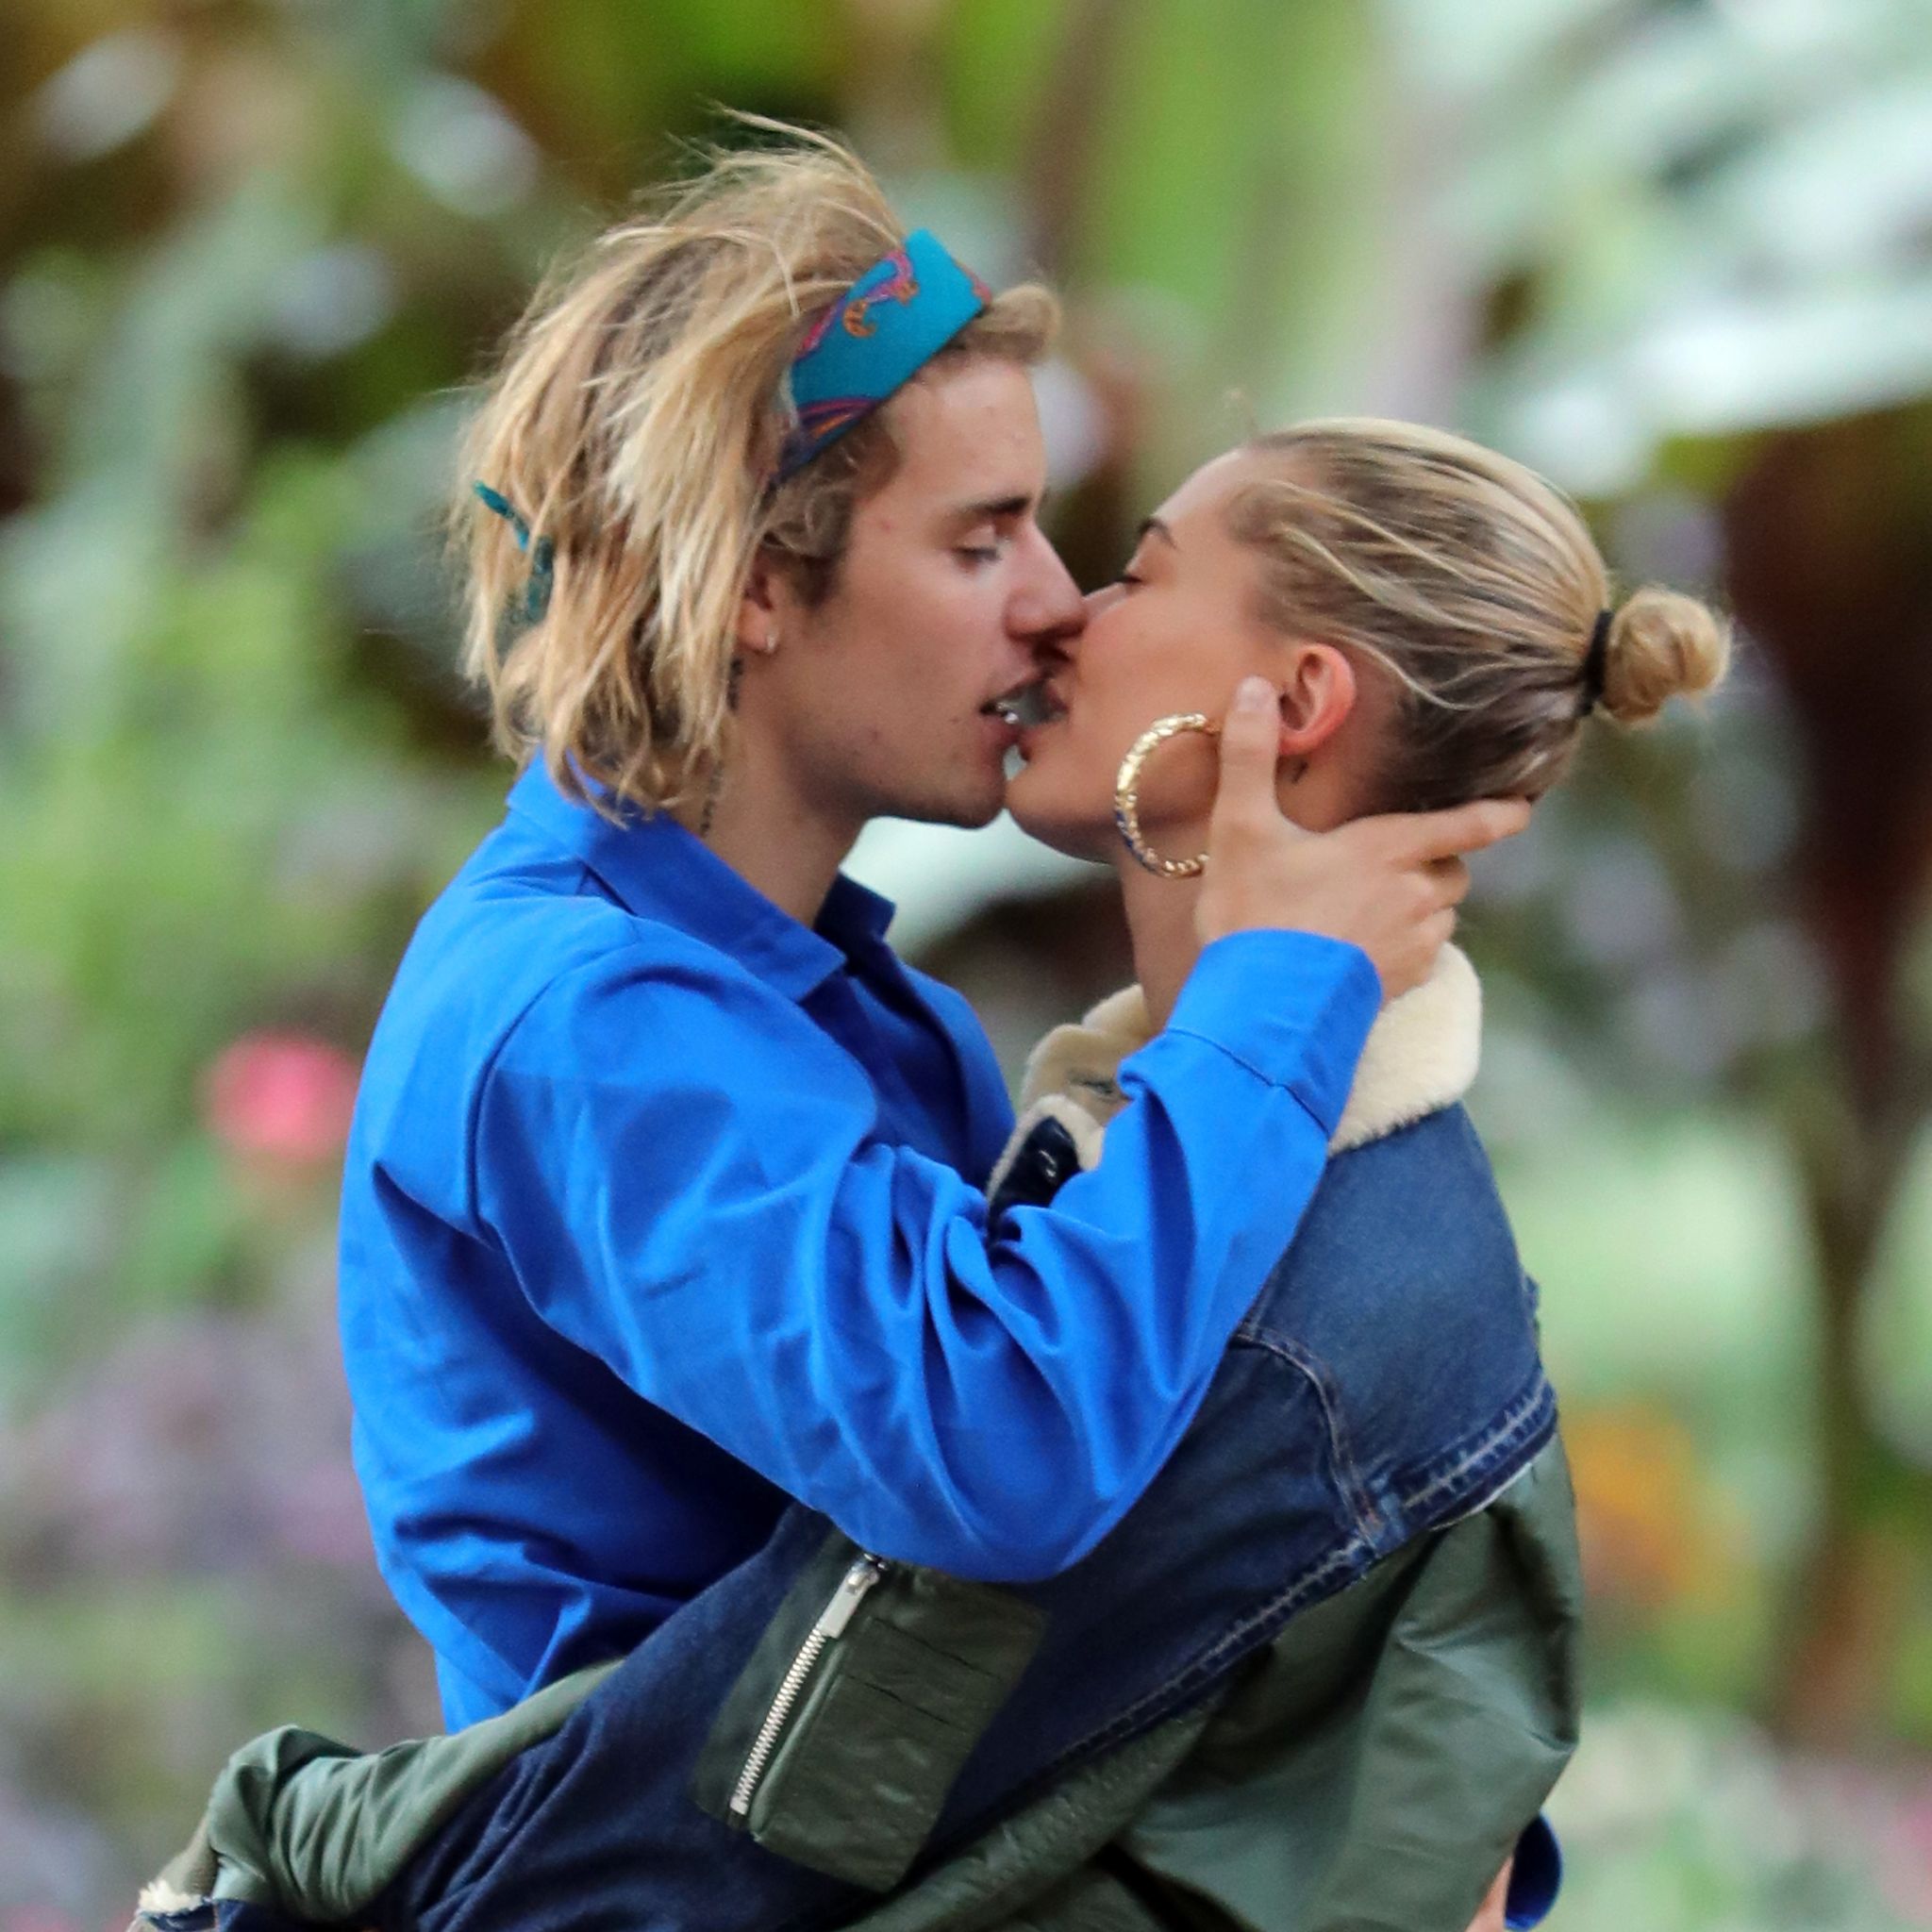 When Justin Bieber Opened Up On His S*x Life With Wife Hailey